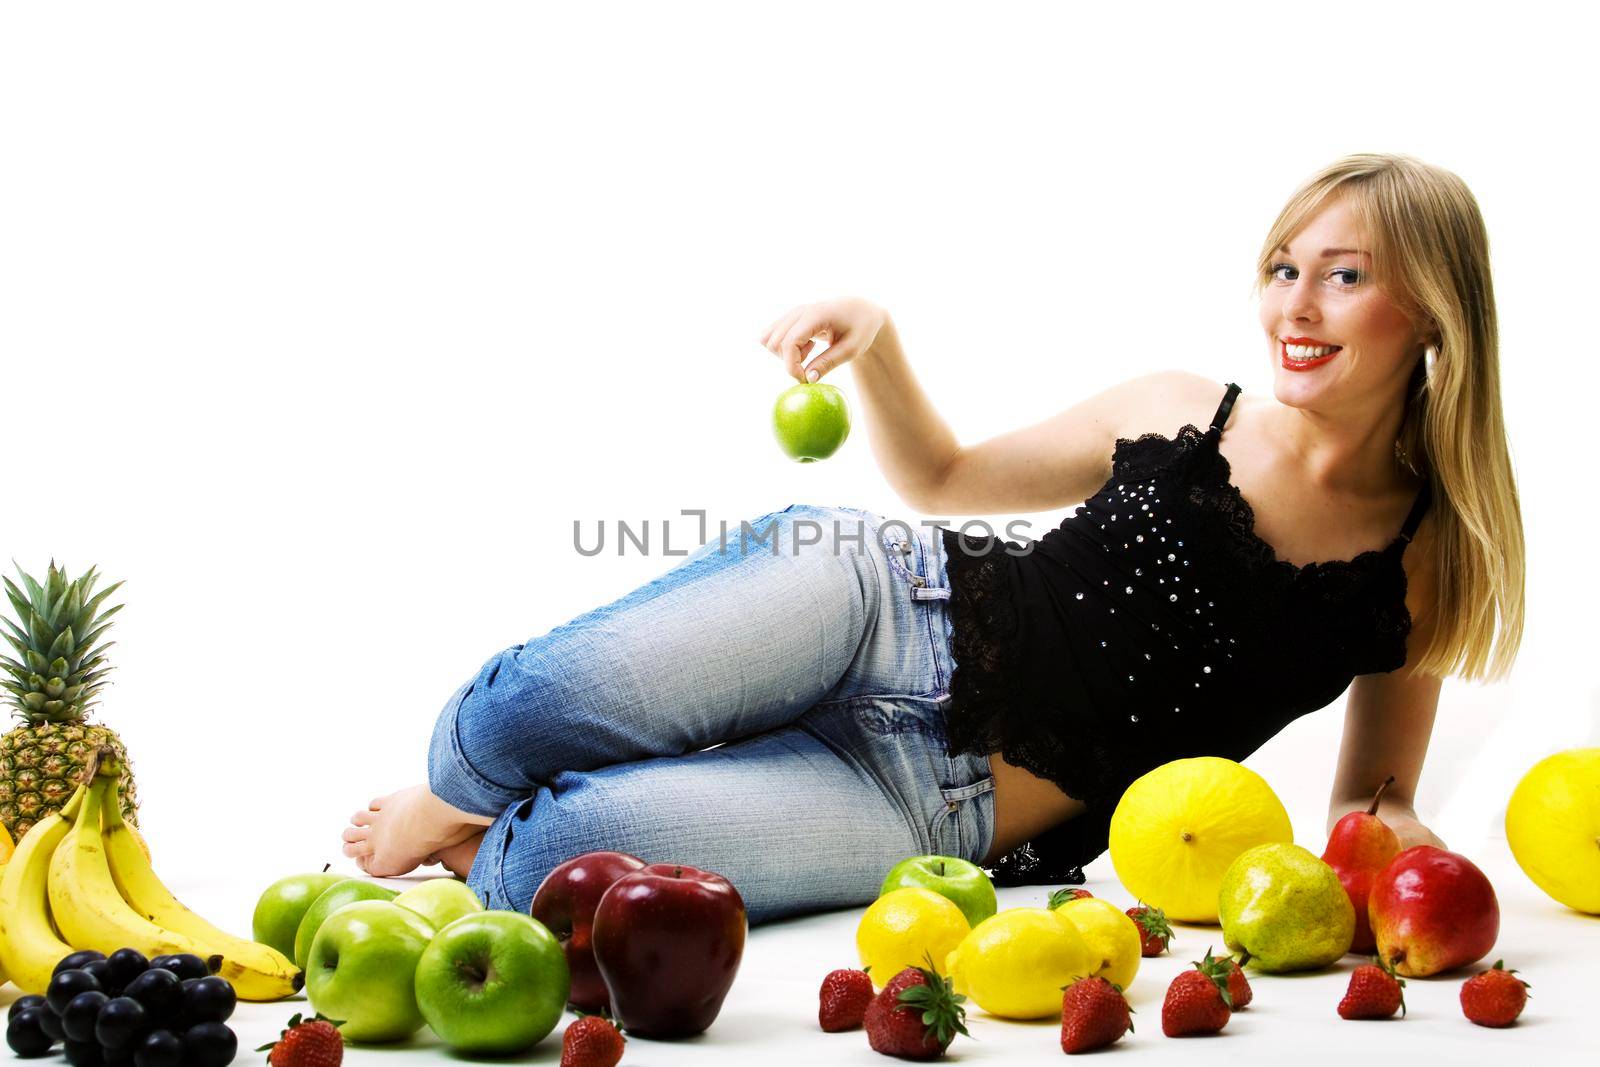 Food, fruit and healthy nutrition - Green apple on the hip of a beautiful blond girl